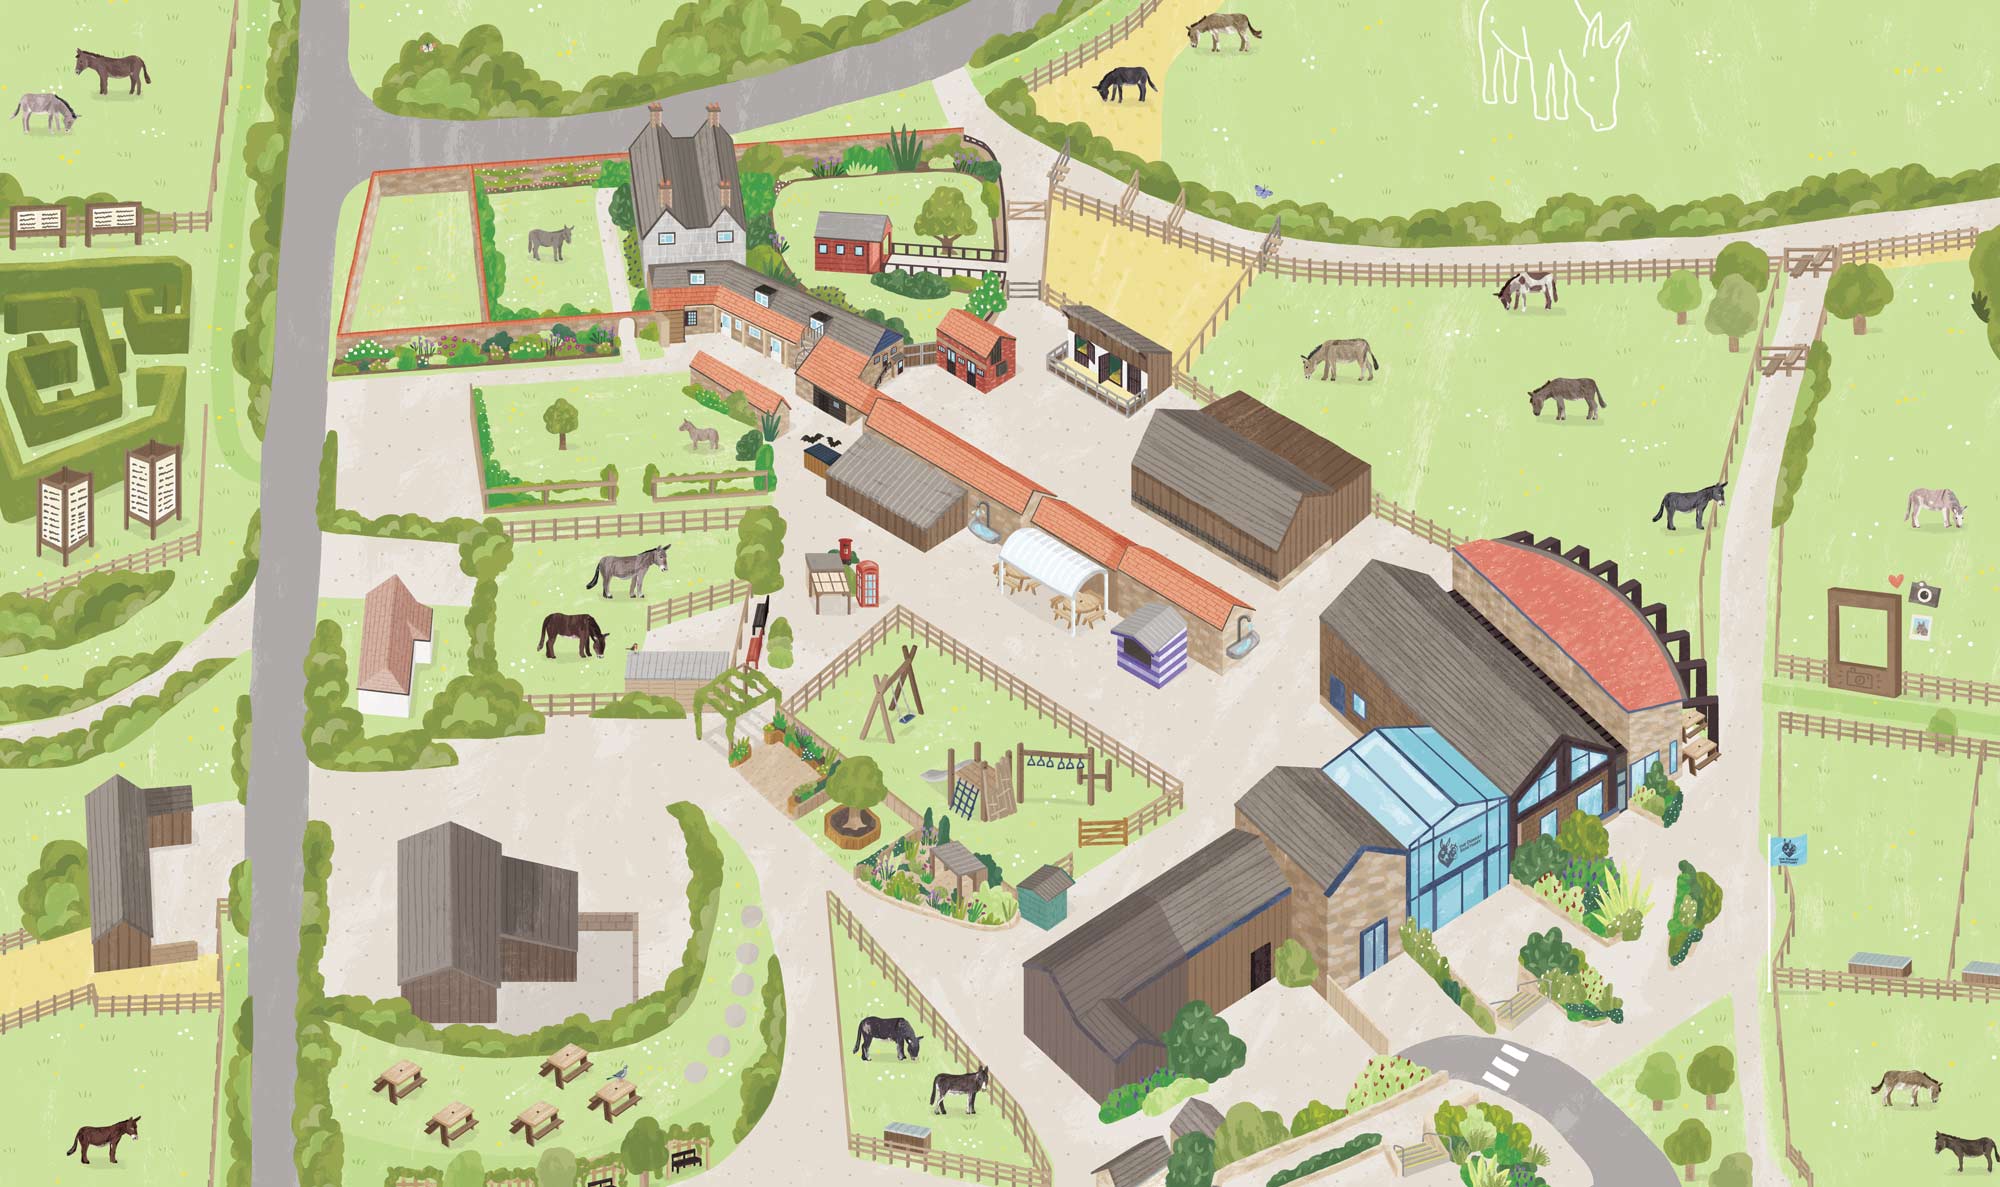 Close up of part of the map of the Donkey Sanctuary, Sidmouth, by Elly Jahnz